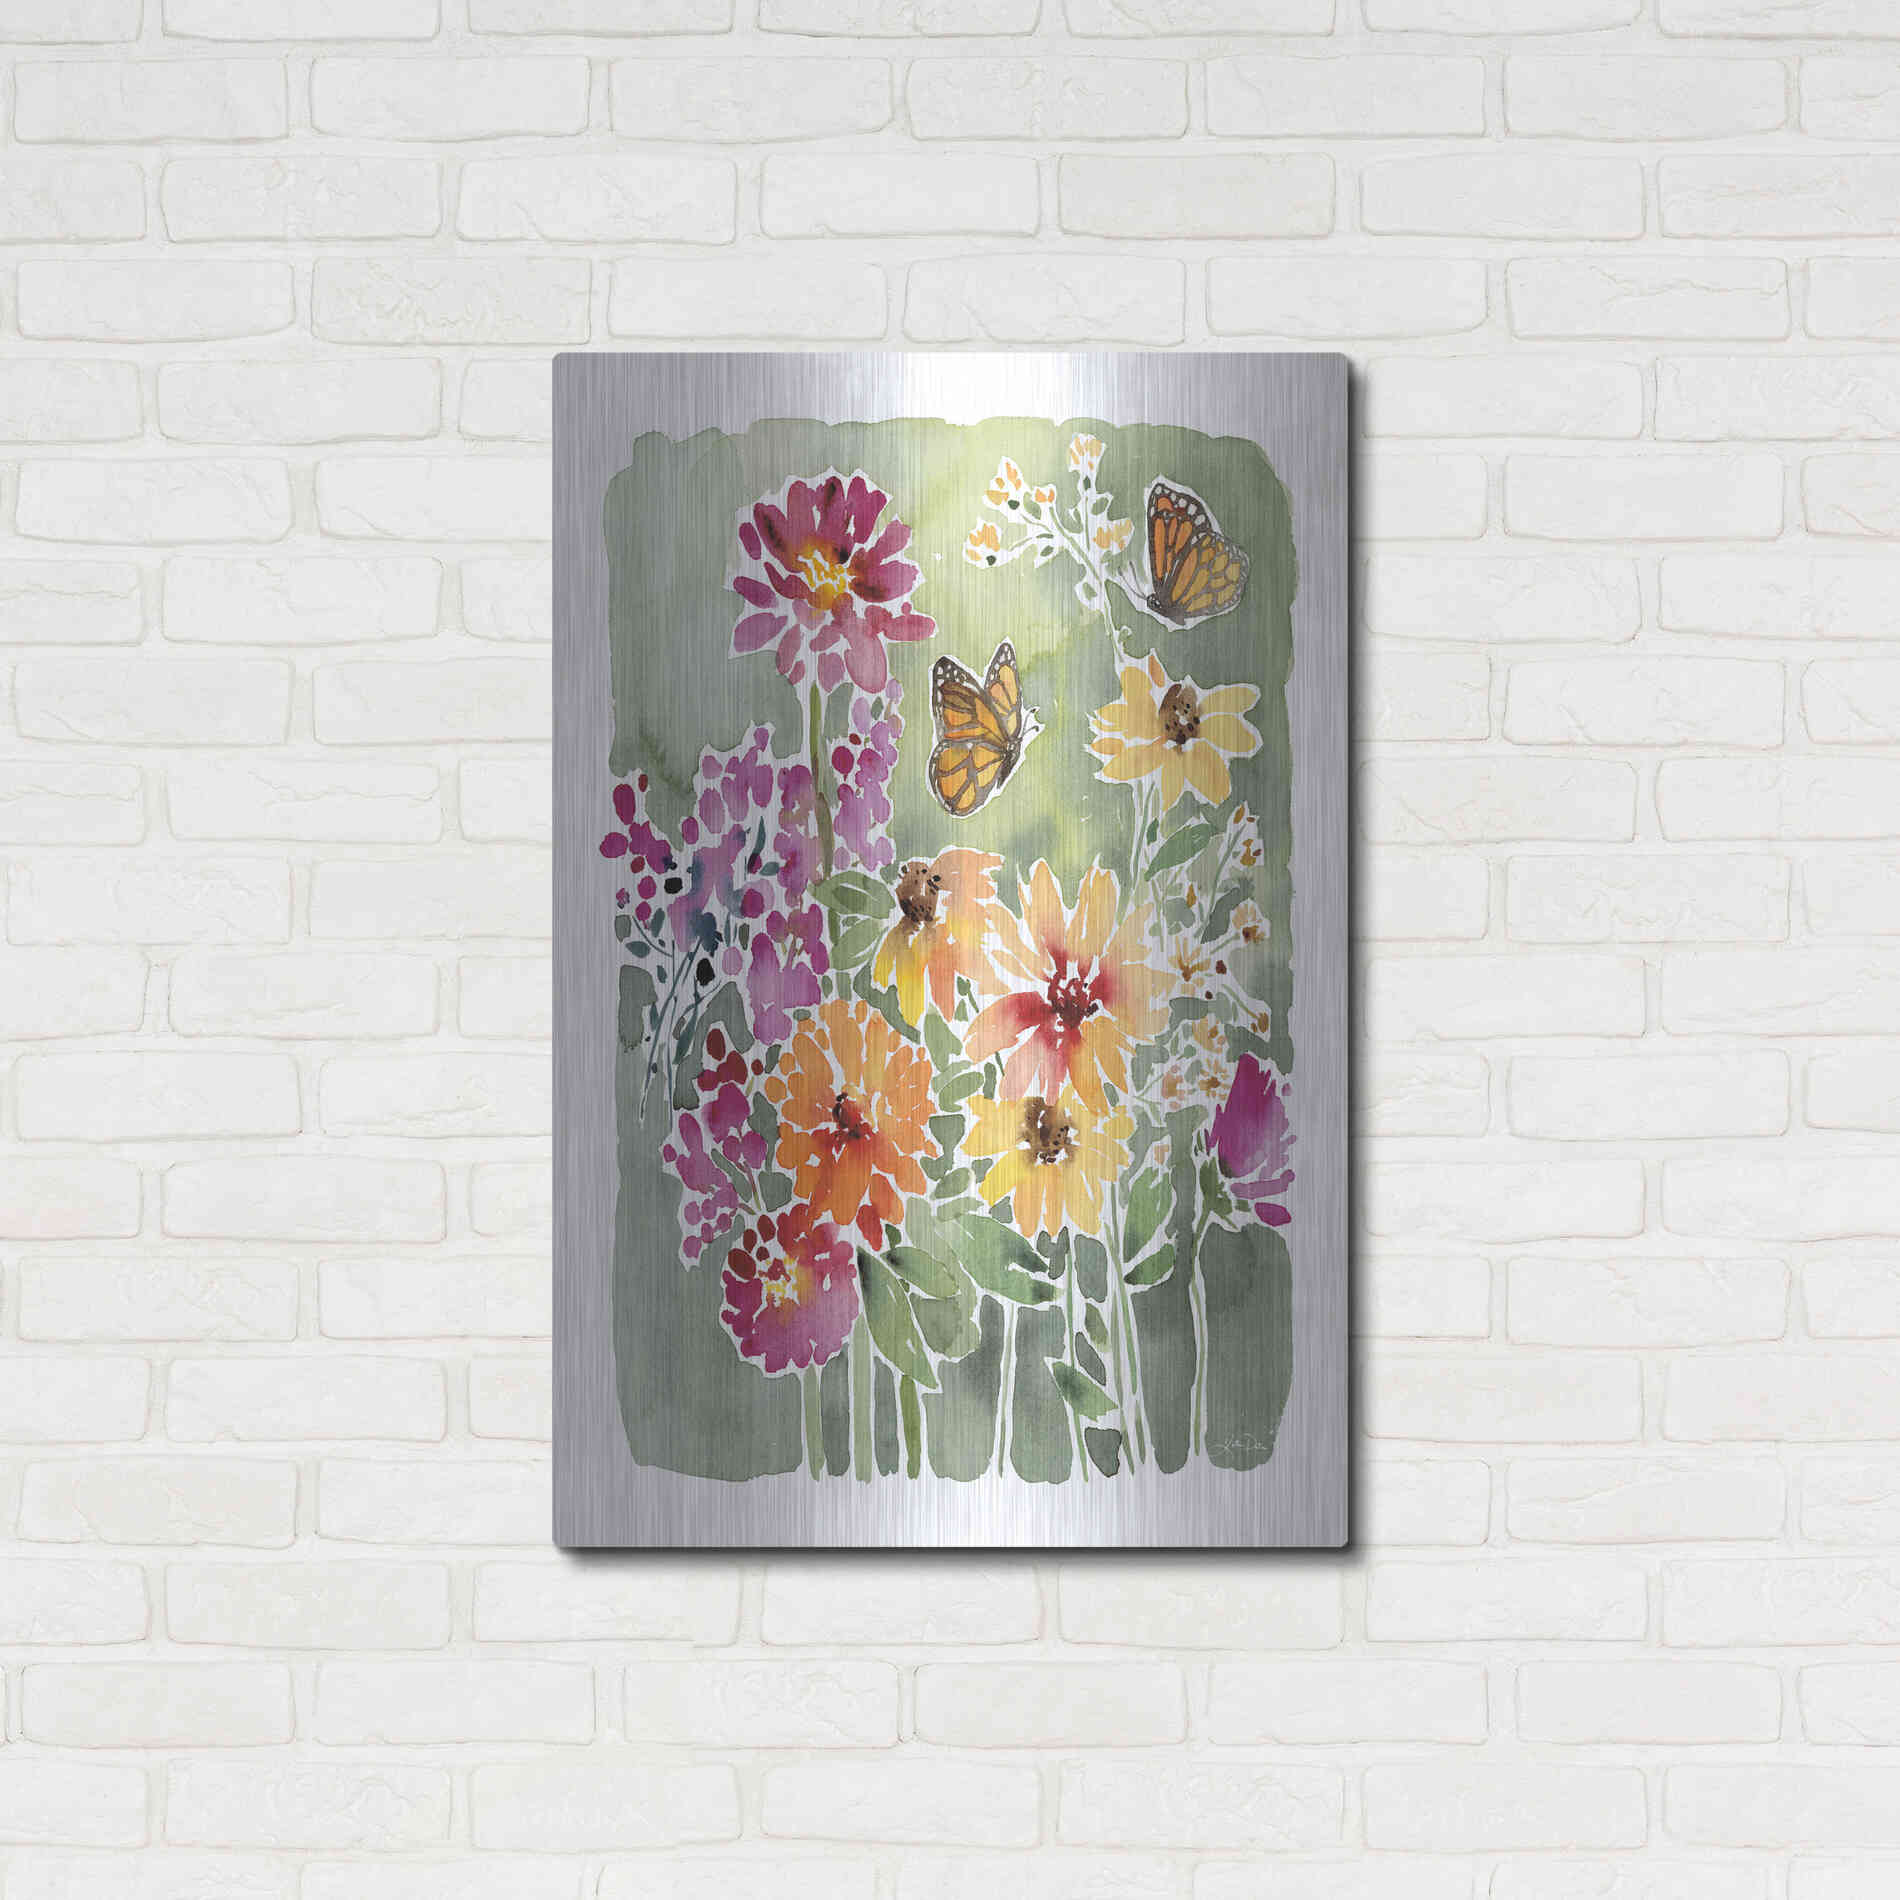 Luxe Metal Art 'Monarchs and Blooms' by Katrina Pete, Metal Wall Art,24x36